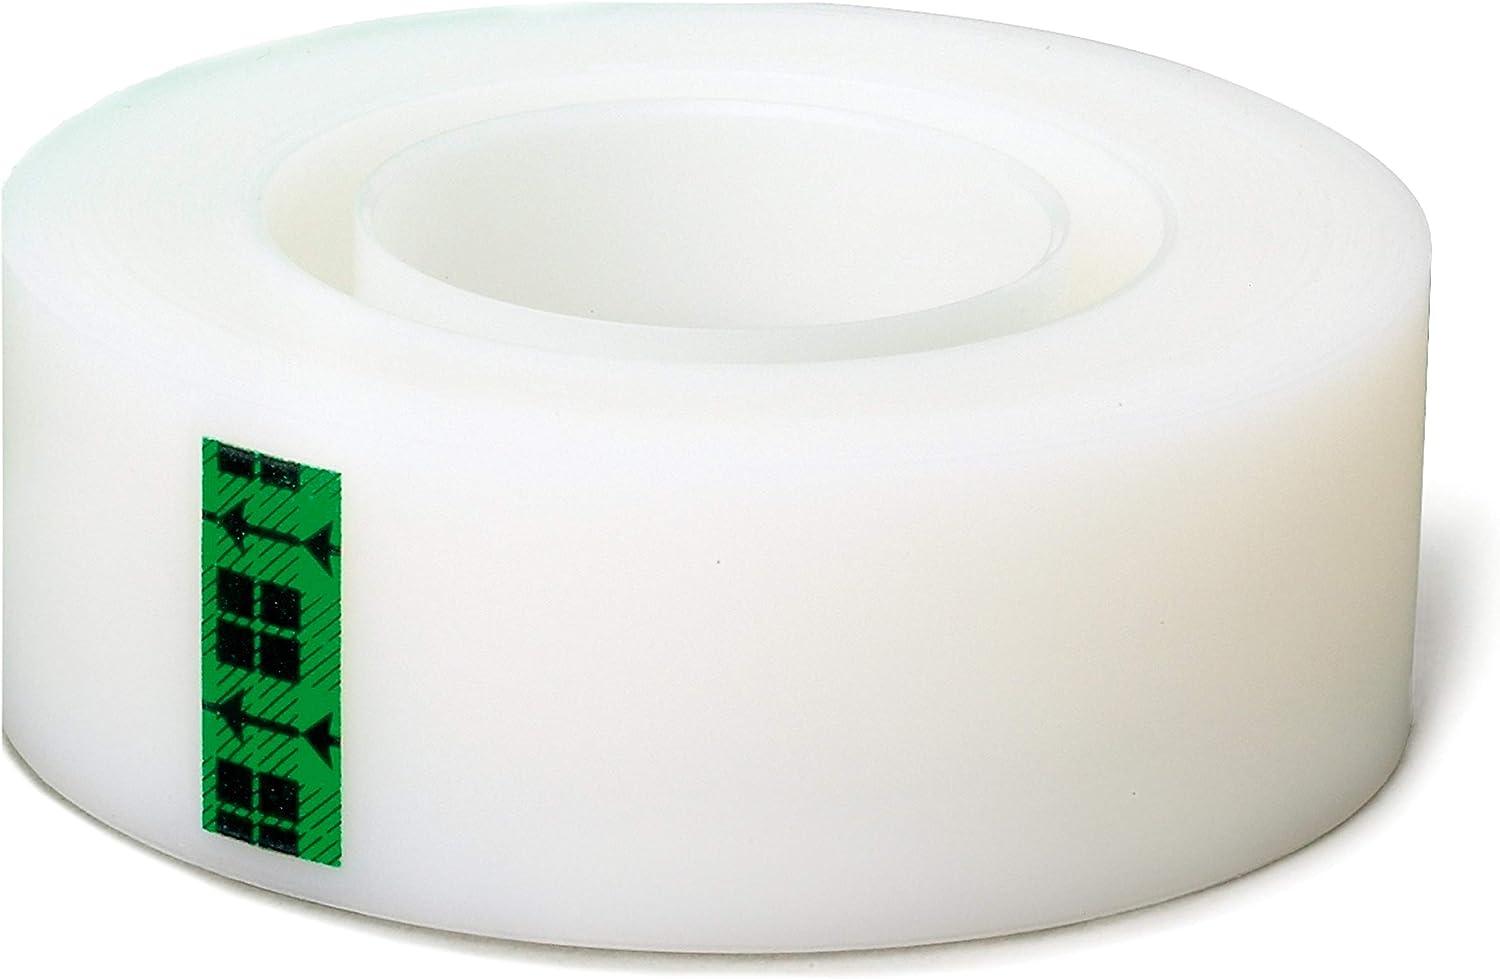 Scotch Magic Tape 6 Rolls Numerous Applications Invisible Engineered for  Repairing 3/4 x 1000 Inches Boxed (810K6) 6 Rolls Tape